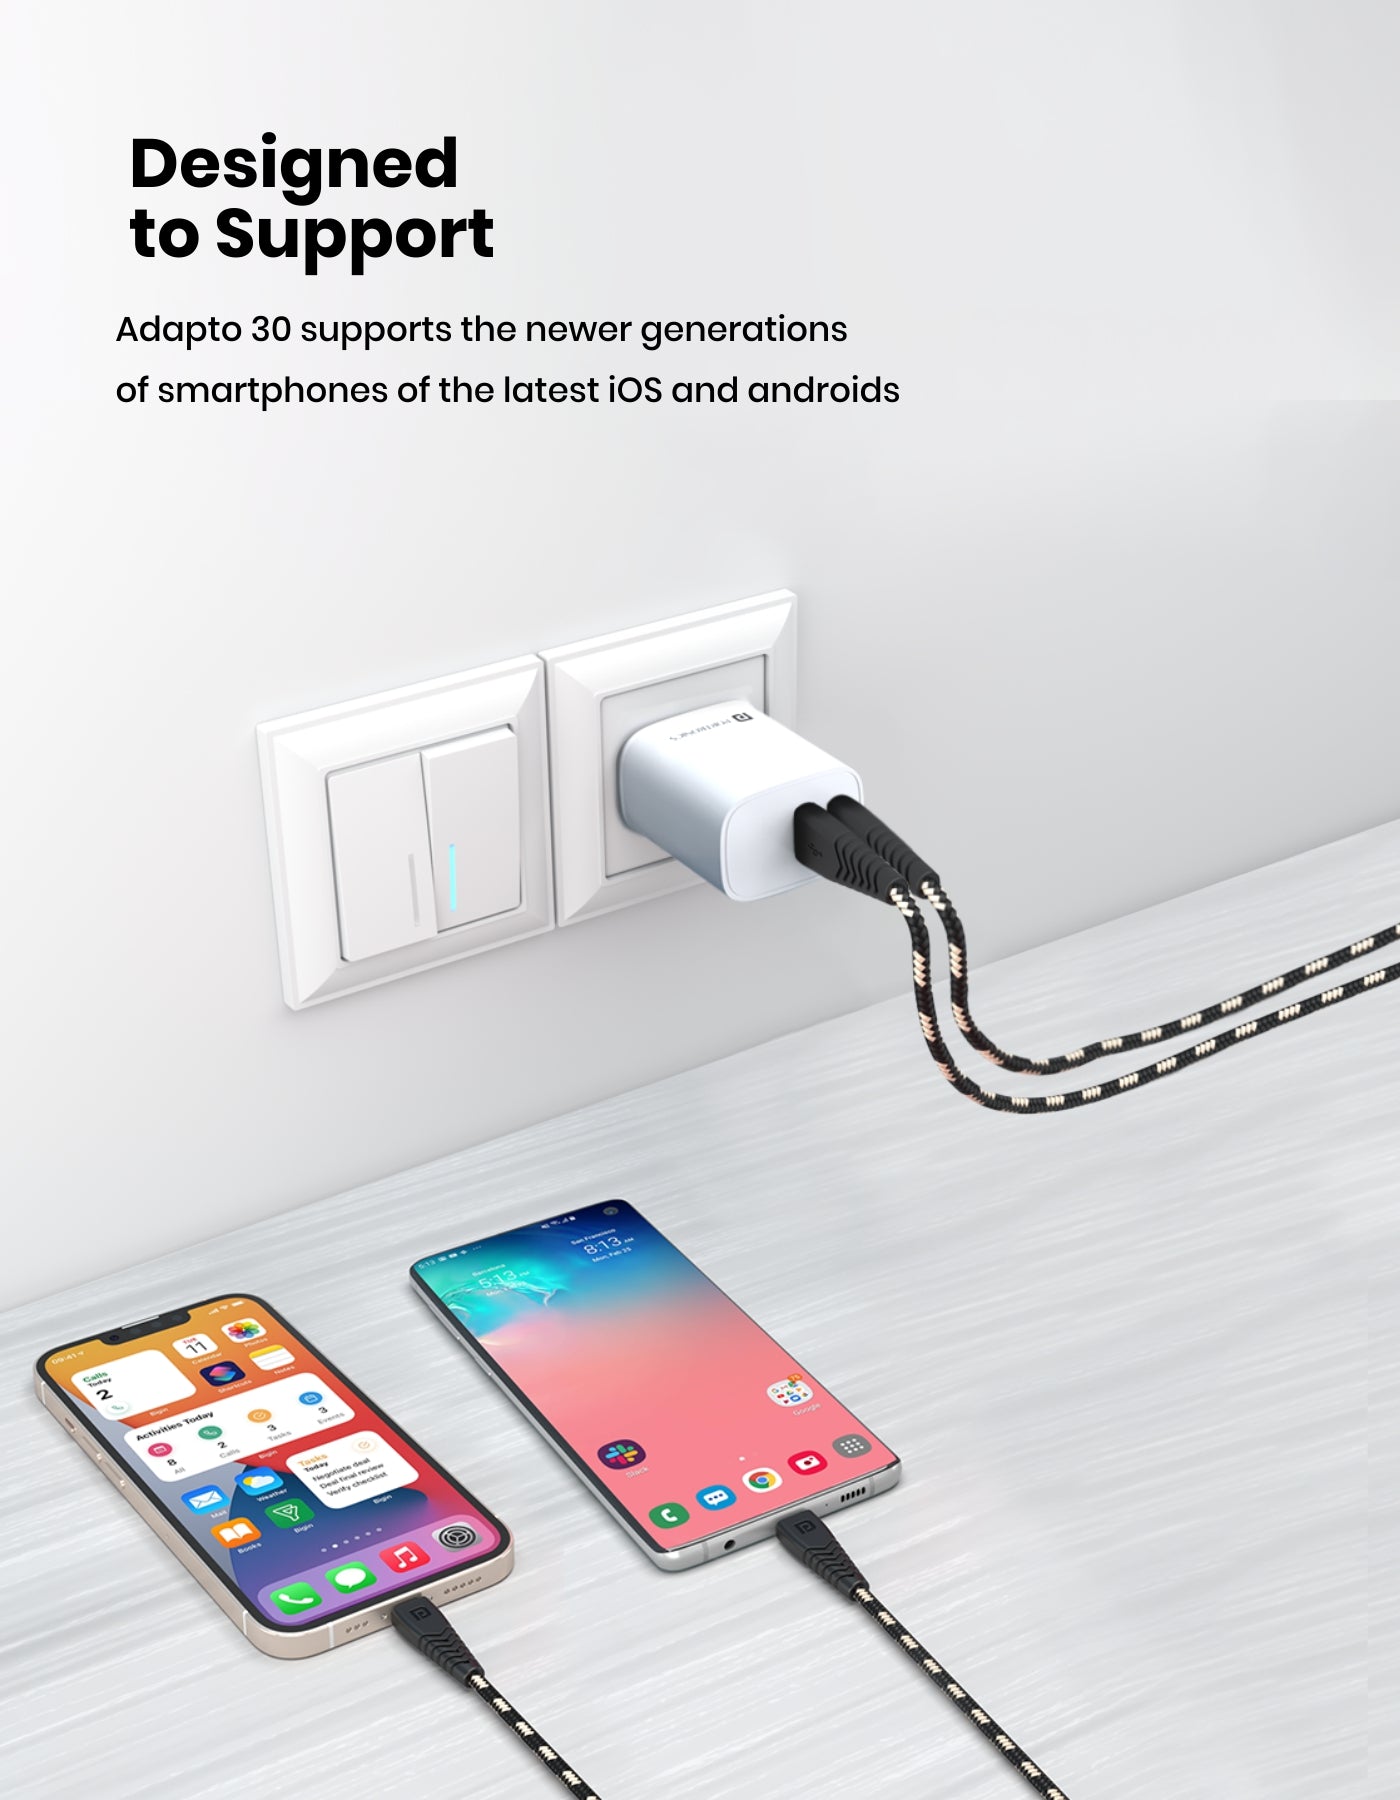 Portronics Adapto 30 fast charger supports the newer generations of smartphones of the latest iOS and androids.